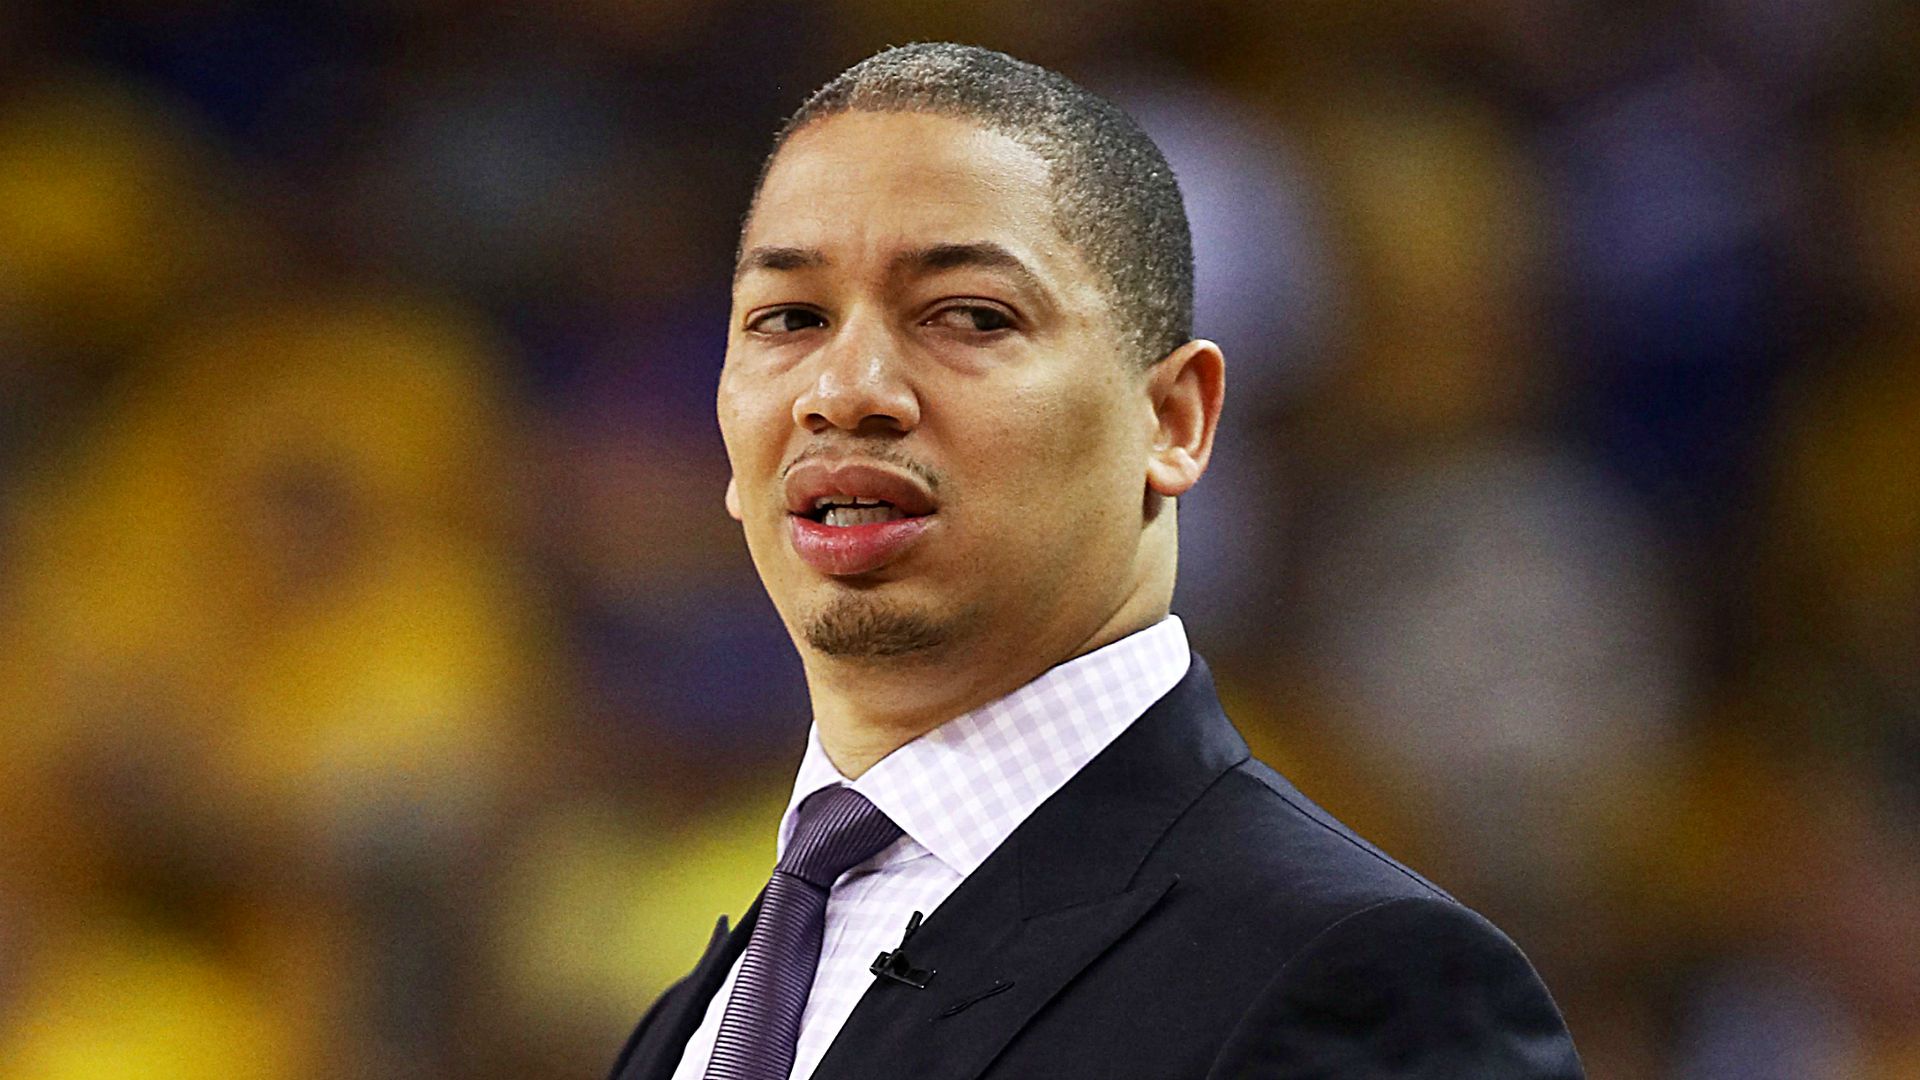 Clippers hiring Tyronn Lue as Doc Rivers' top assistant coach, report says